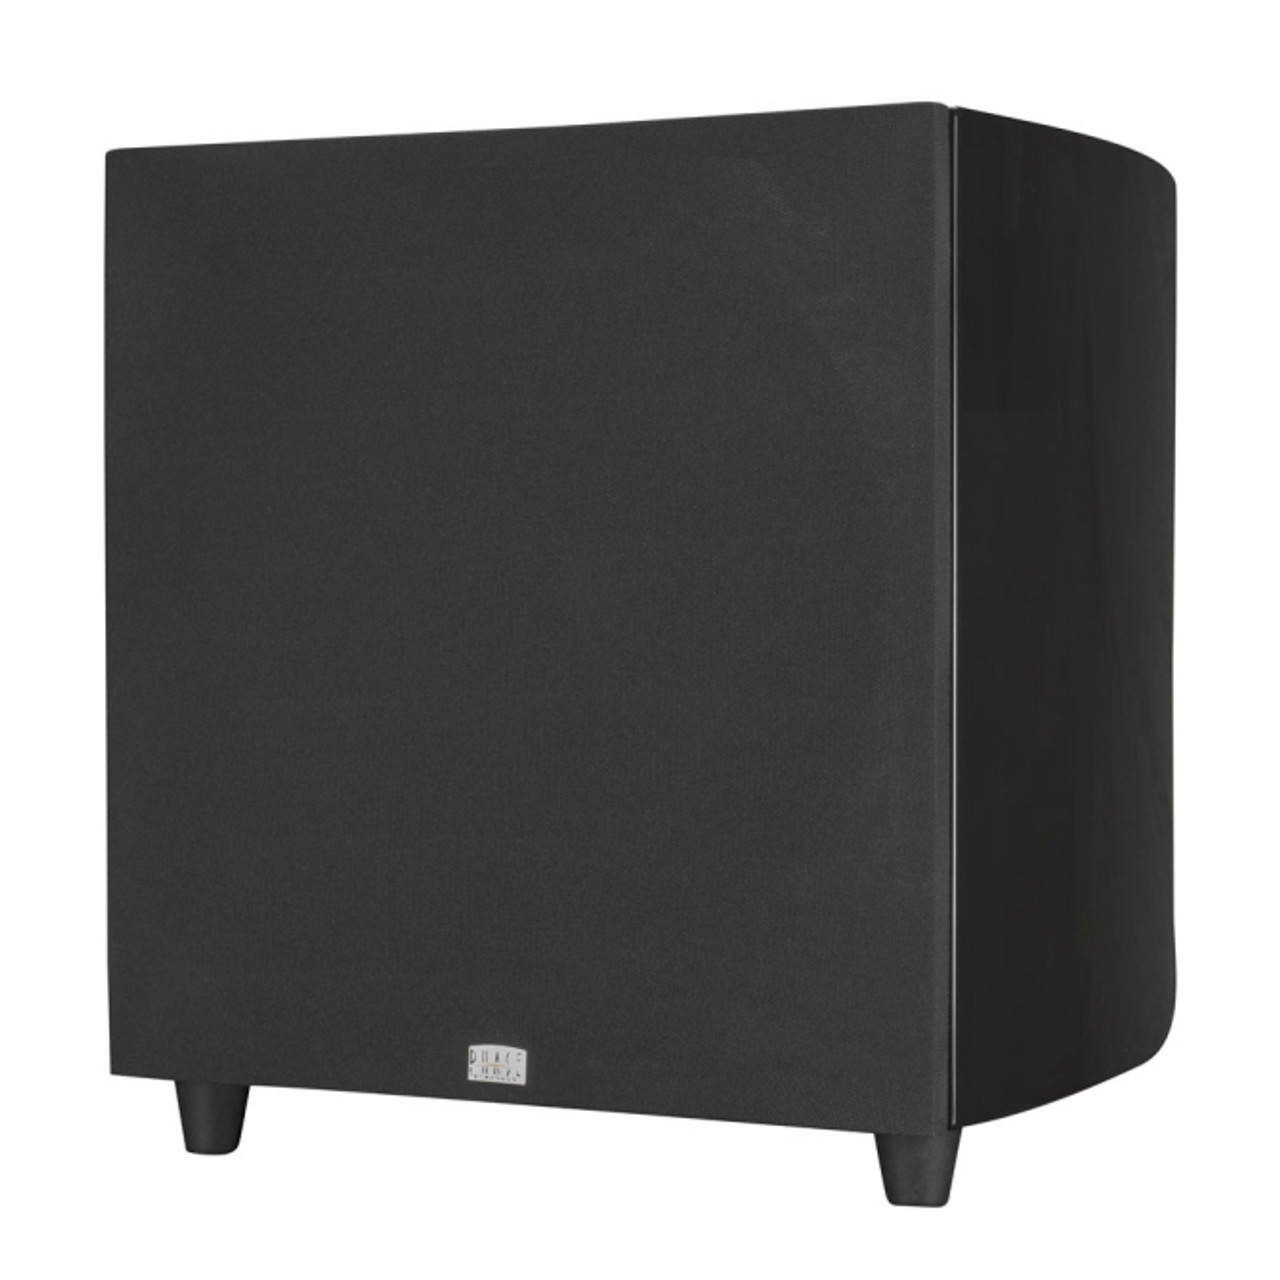 Phase Technology PC-SUB WL10 10" Wireless Premier Collection Subwoofer (PC-SUB WL10 GB-)